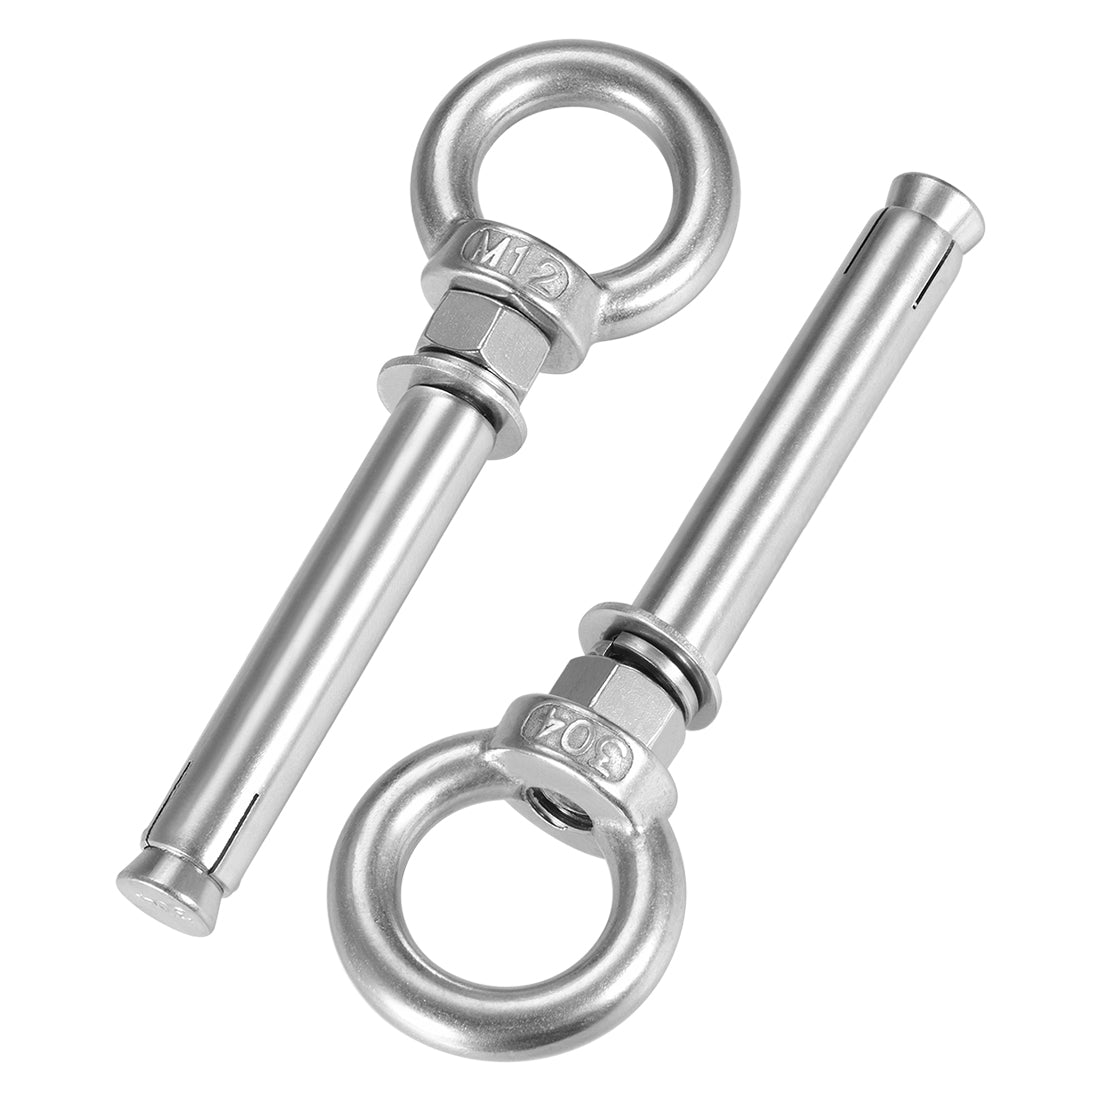 uxcell Uxcell M12 x 120 Expansion Eyebolt Eye Nut Screw with Ring Anchor Raw Bolts 2 Pcs